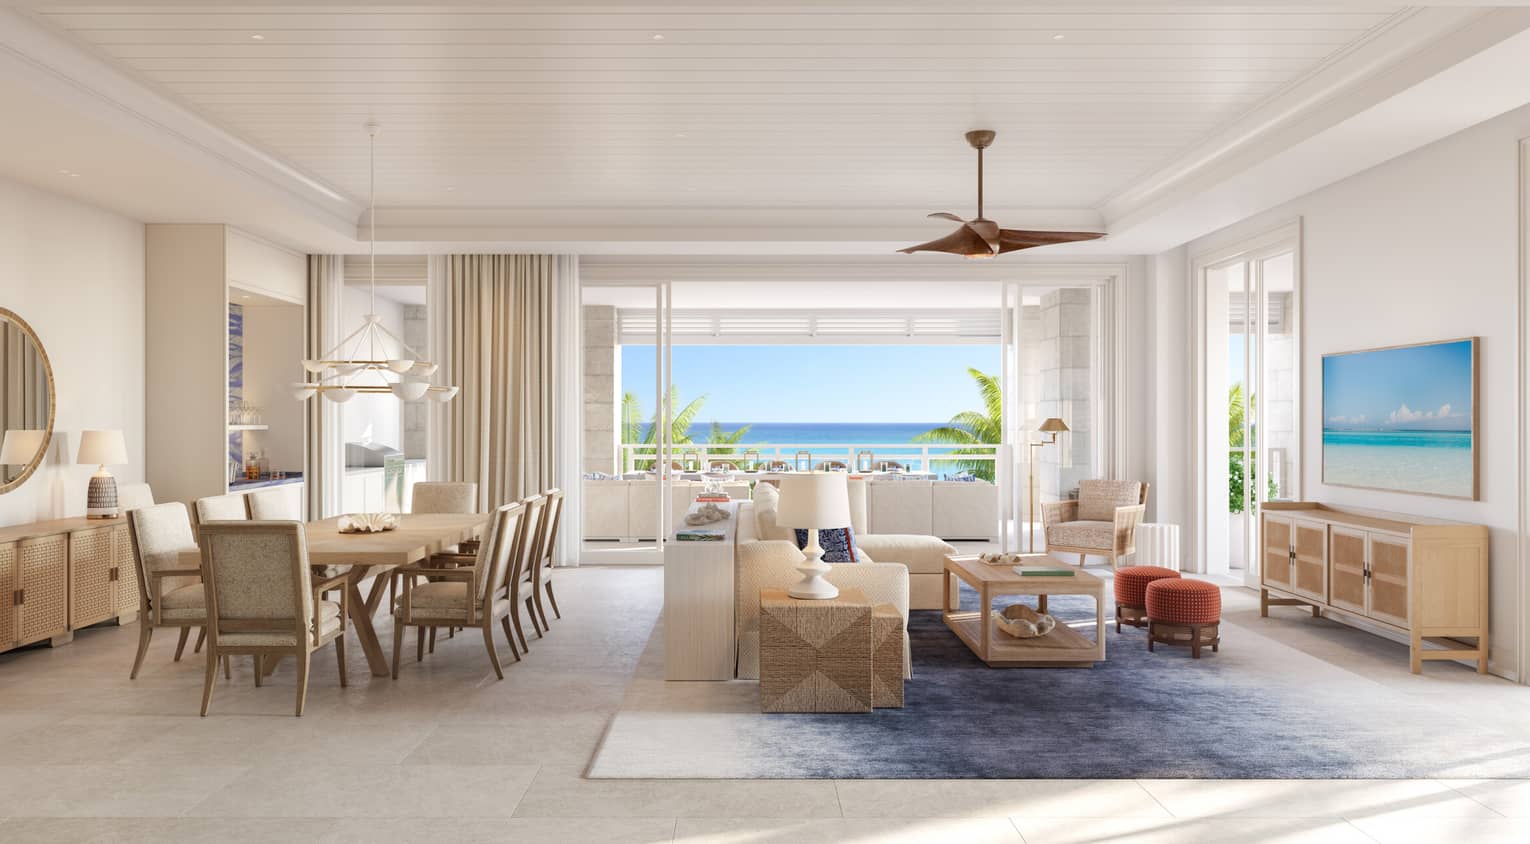 ,Rendering of a modern residence living area with an ocean view